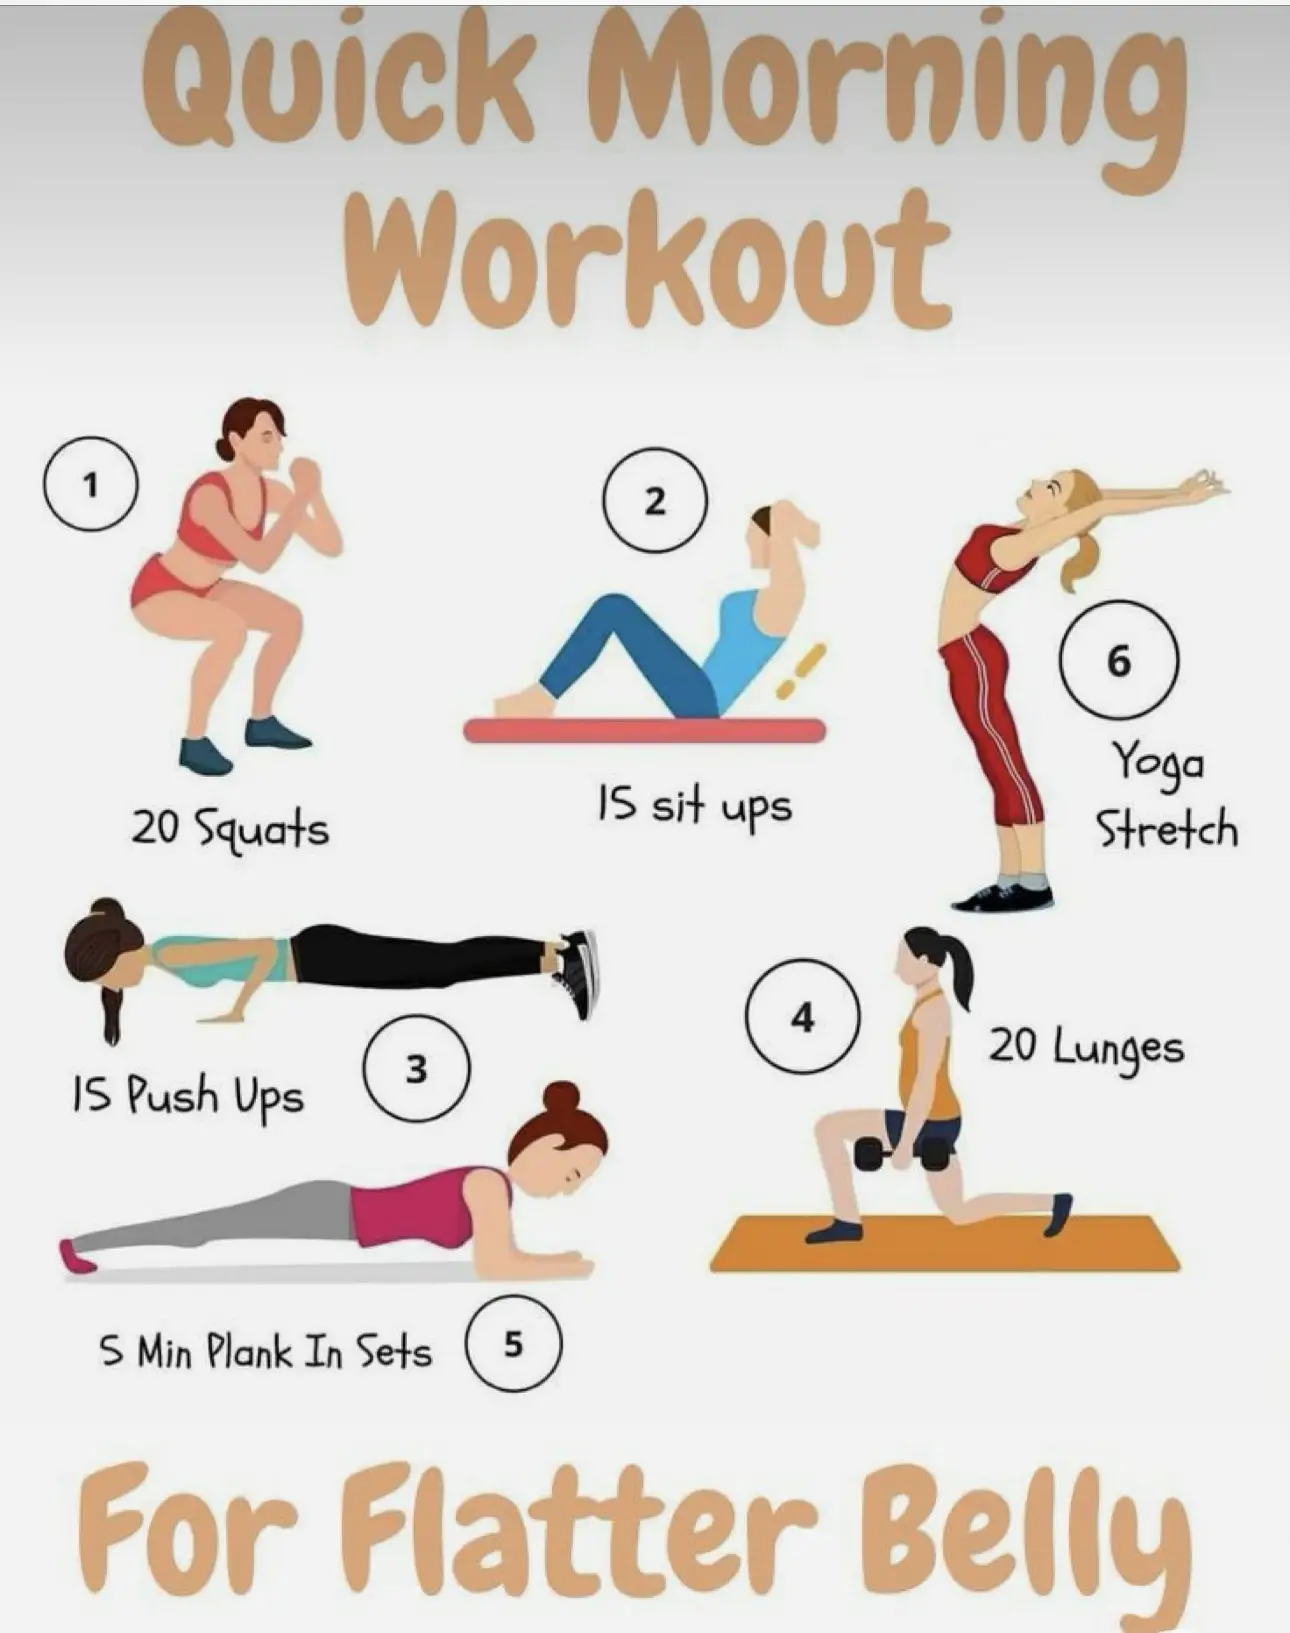 Quick Morning Workout